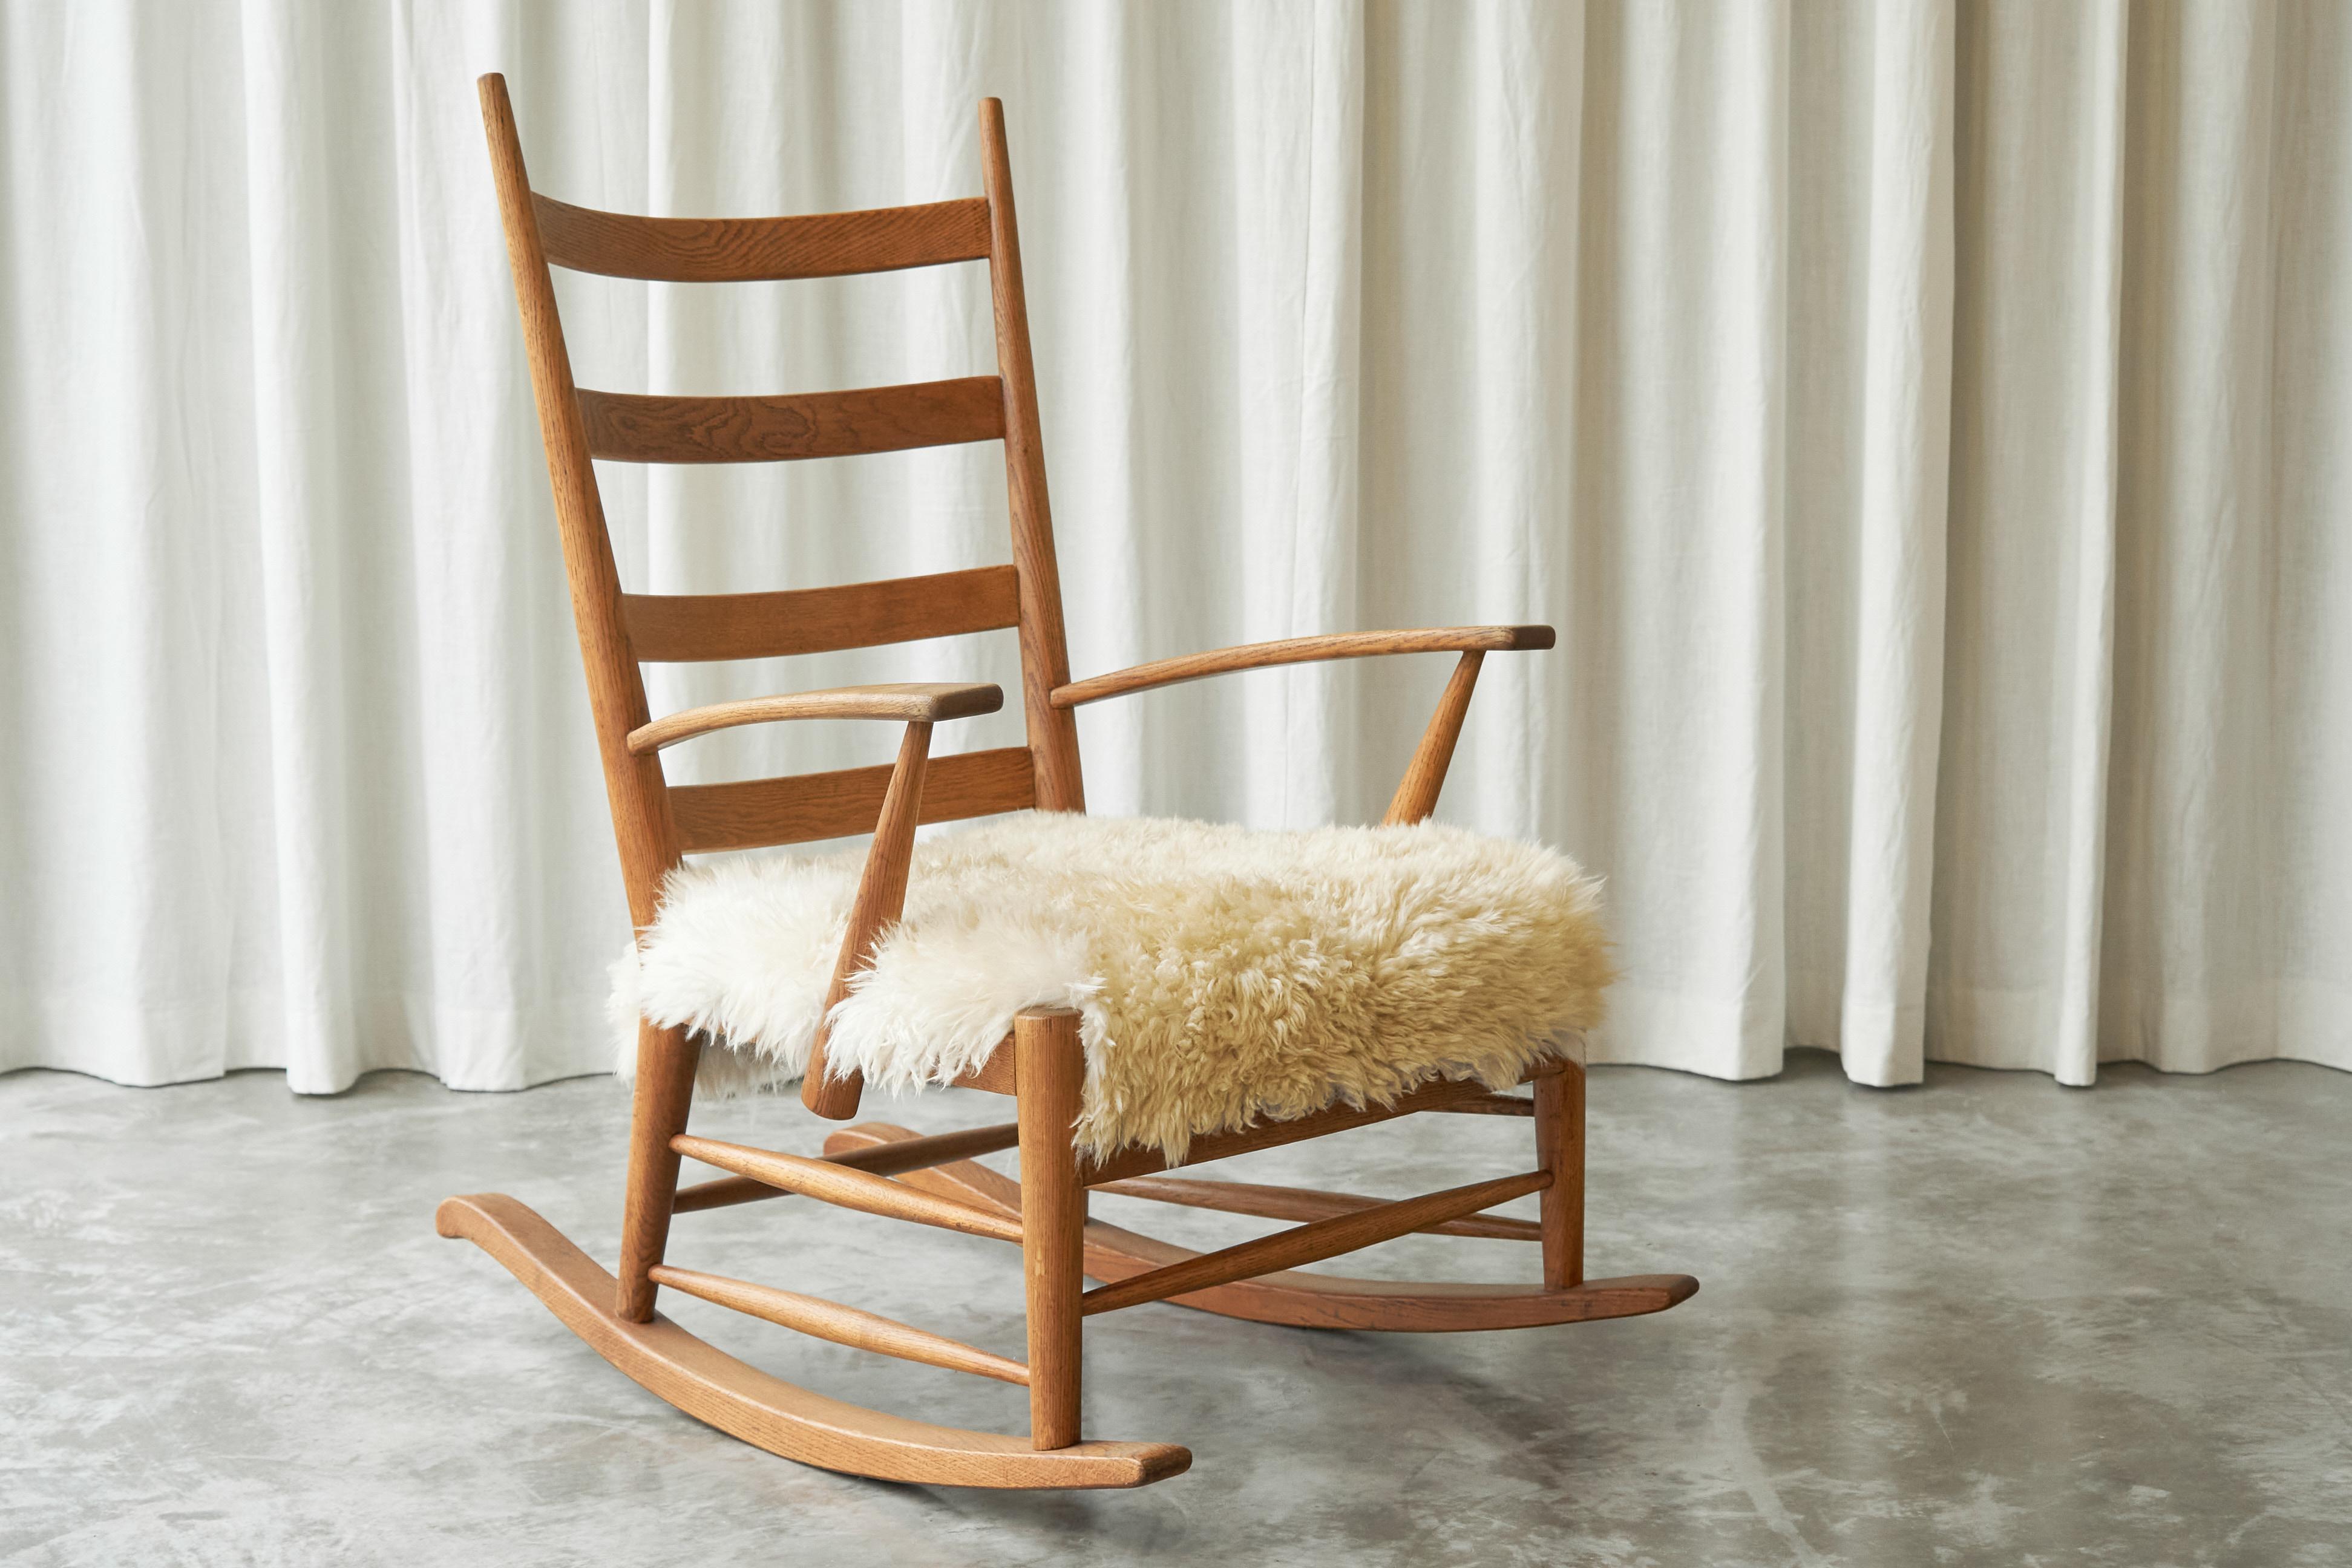 Rocking Chair in Solid Oak and Sheepskin, France 1960s.

Sit down and relax…. Enjoy your book, a warm cup of tea or a good glass of wine. Coming home after a long day will never be the same, thanks to this wonderful 1960s rocking chair. It was made